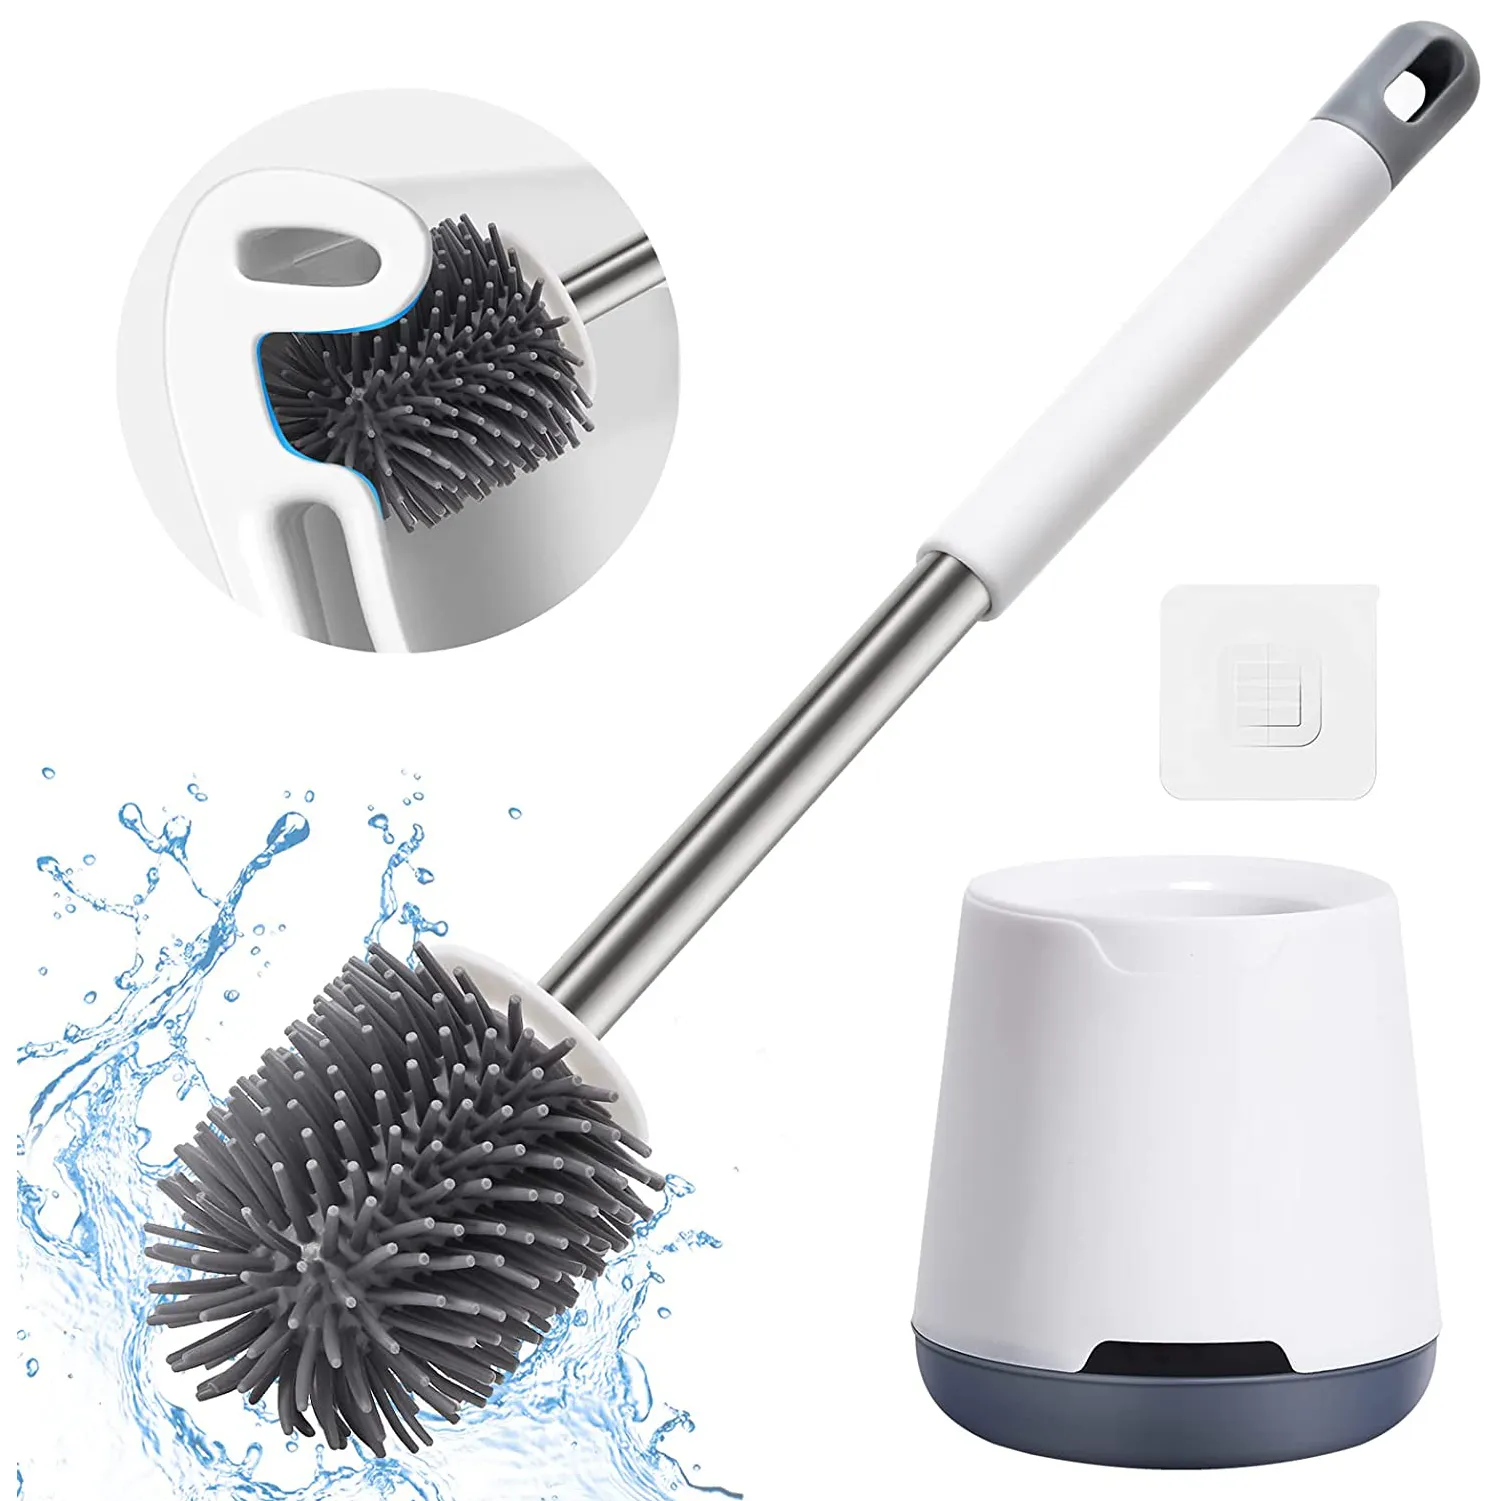 Amazon Hot Selling Cheap Silicone Holder Soft TPR Cleaning Toilet Brush Wall-mounted Toilet Brush For Bathroom Cleaning